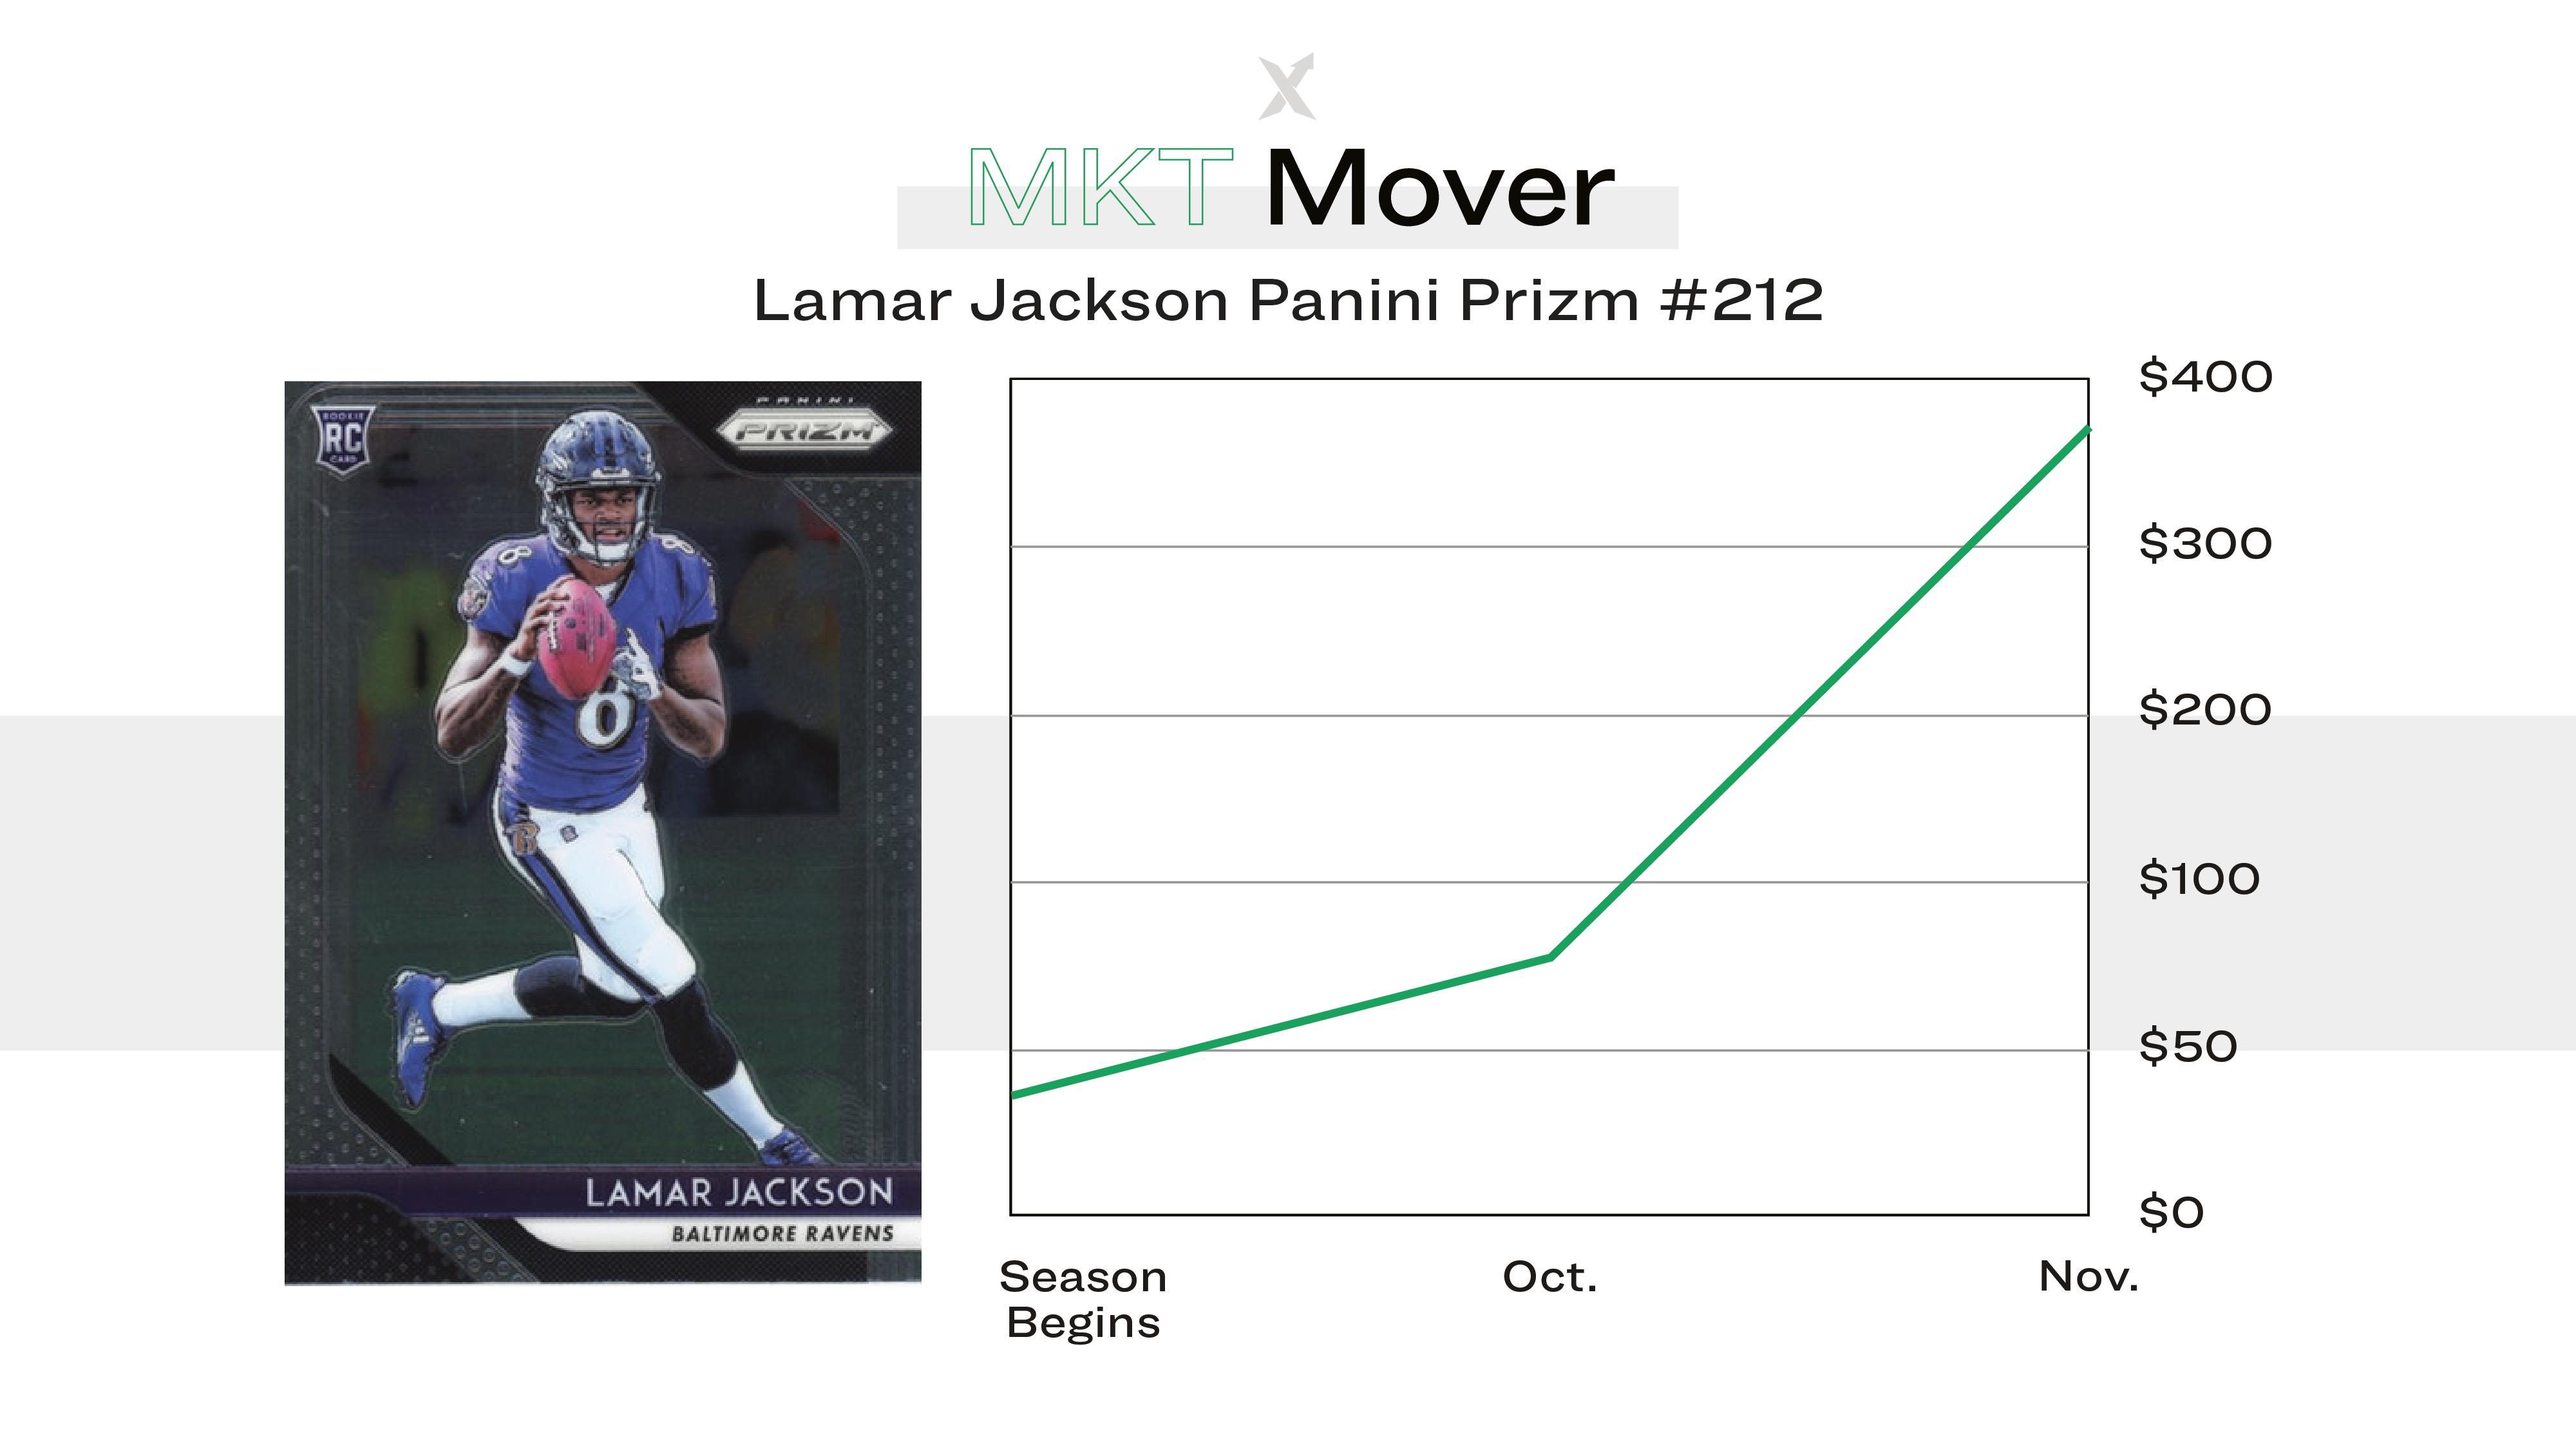 Lamar Jackson's 2018 Panini Prizm number 212 has seen nearly a 100% increase over the course of the season.